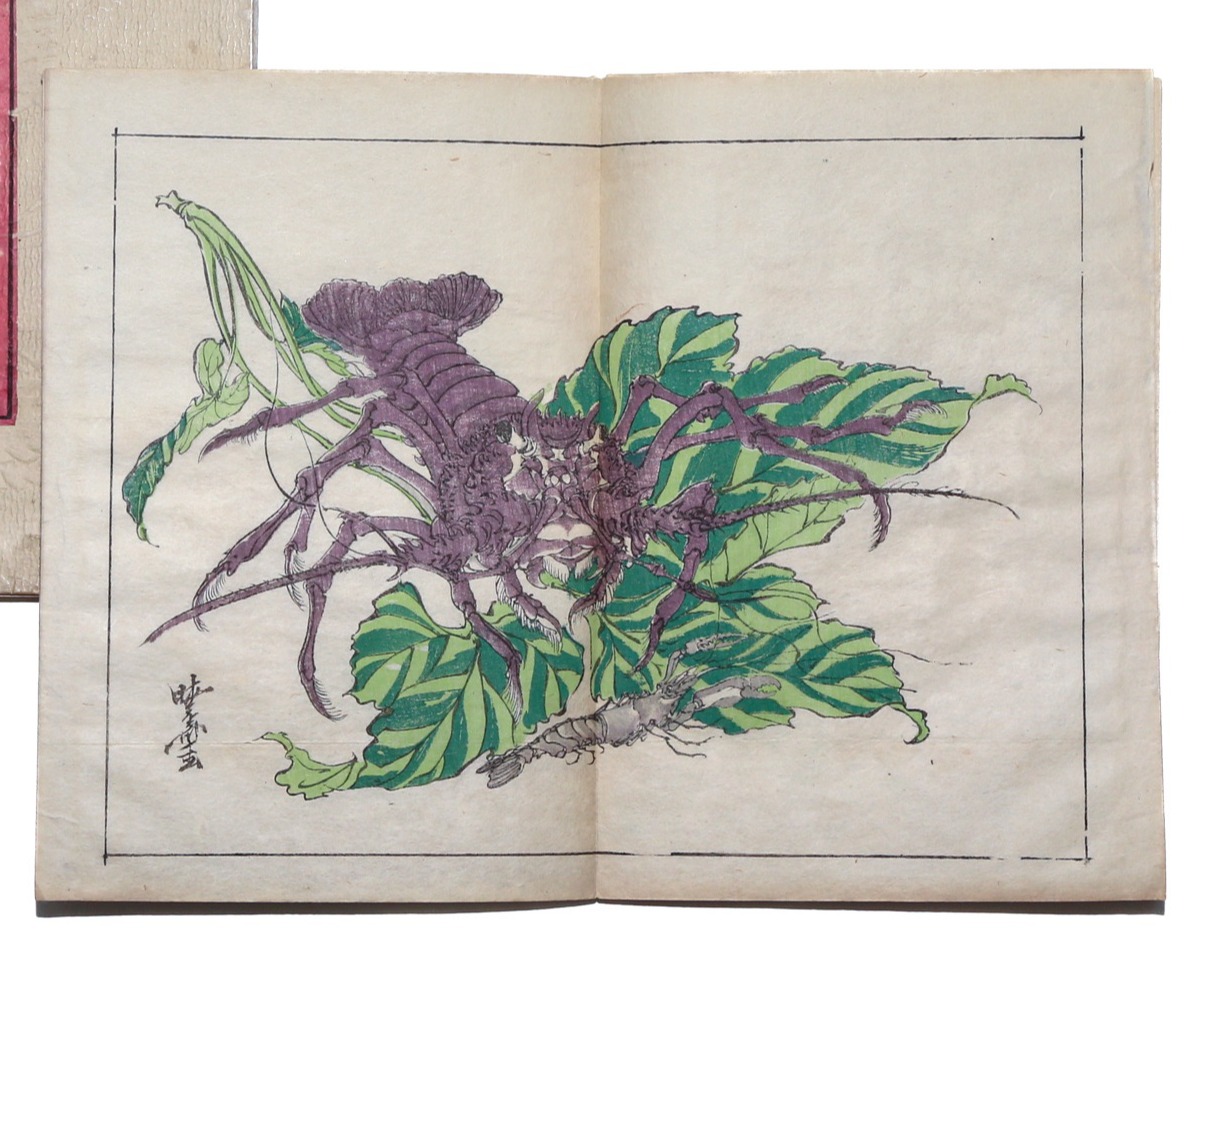 Discover the Rich Culture of Japanese Books at Alex Cooper Auctioneers | May 6 Auction